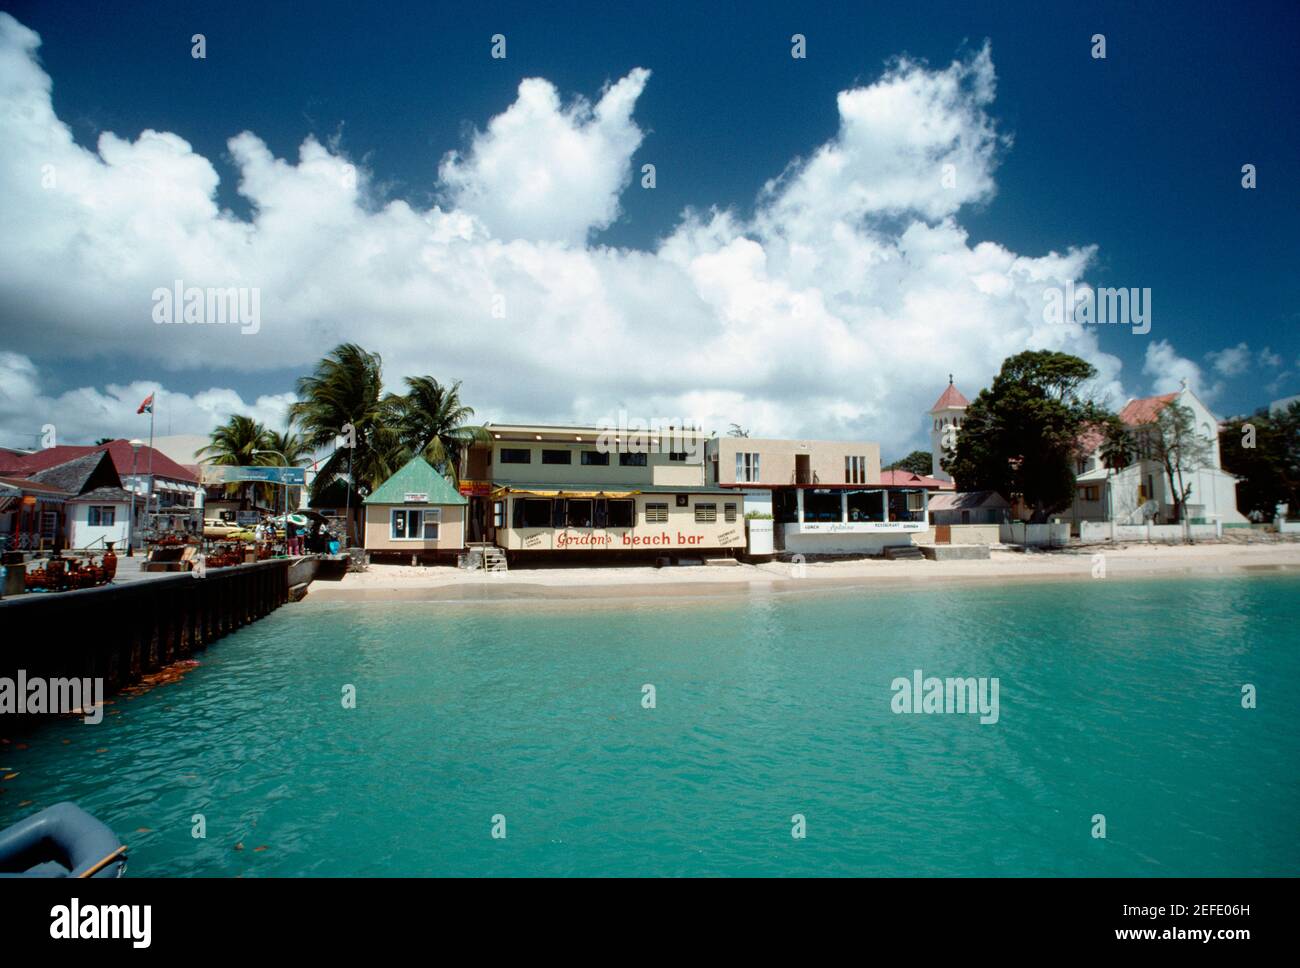 View of a commercial hub along a beach, St. Martin Stock Photo